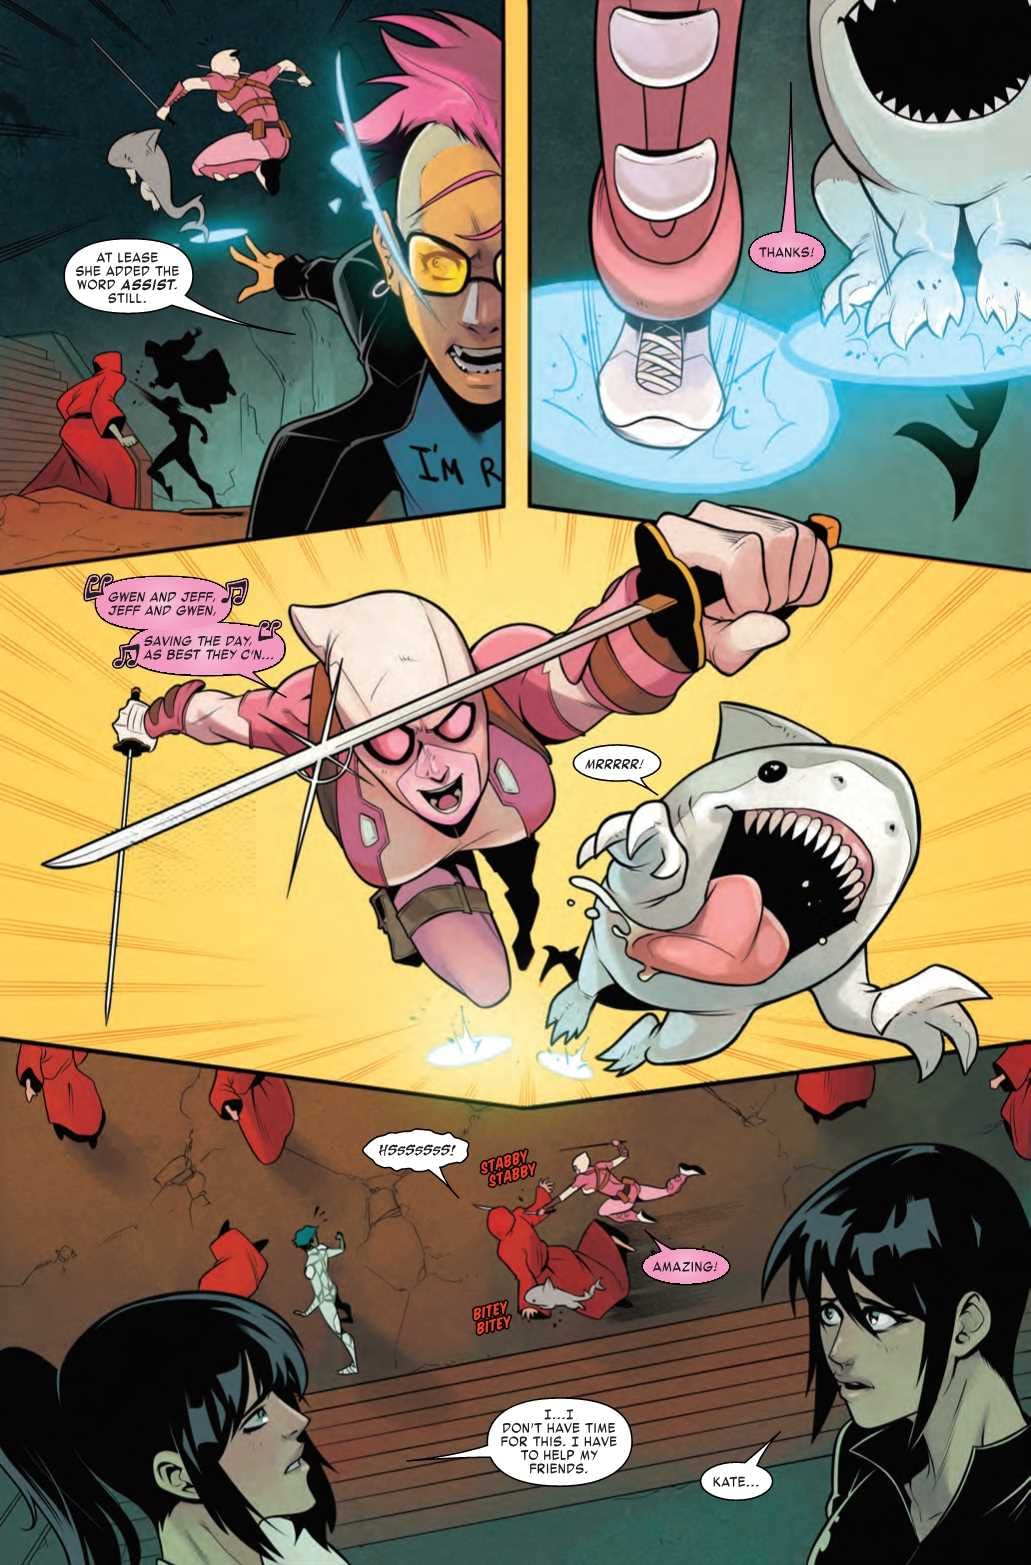 Why You Should Never Trust a Half-Vampire, Even if She's Your Mom - West Coast Avengers #10 Preview